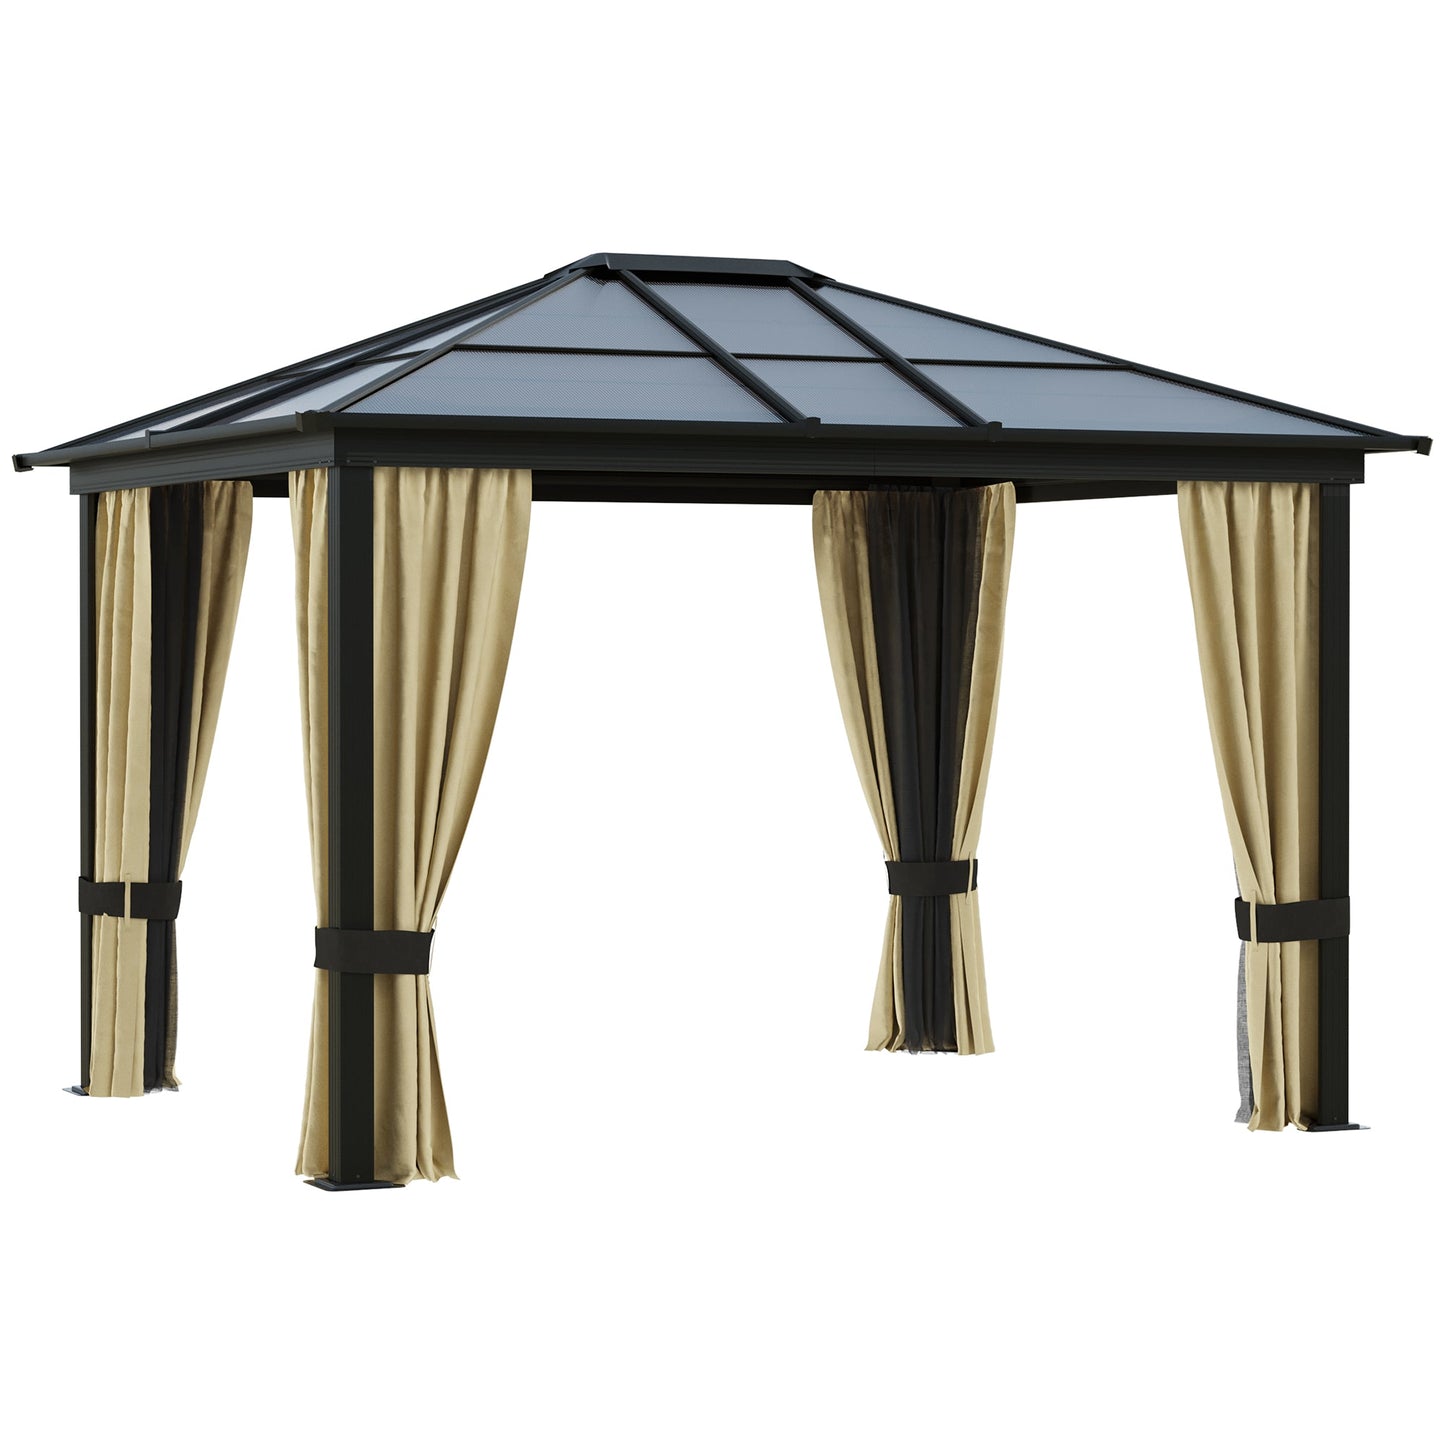 Outdoor and Garden-Patio Gazebo Canopy 12' x 10' Hardtop Luxury Gazebo with Curtains - Outdoor Style Company